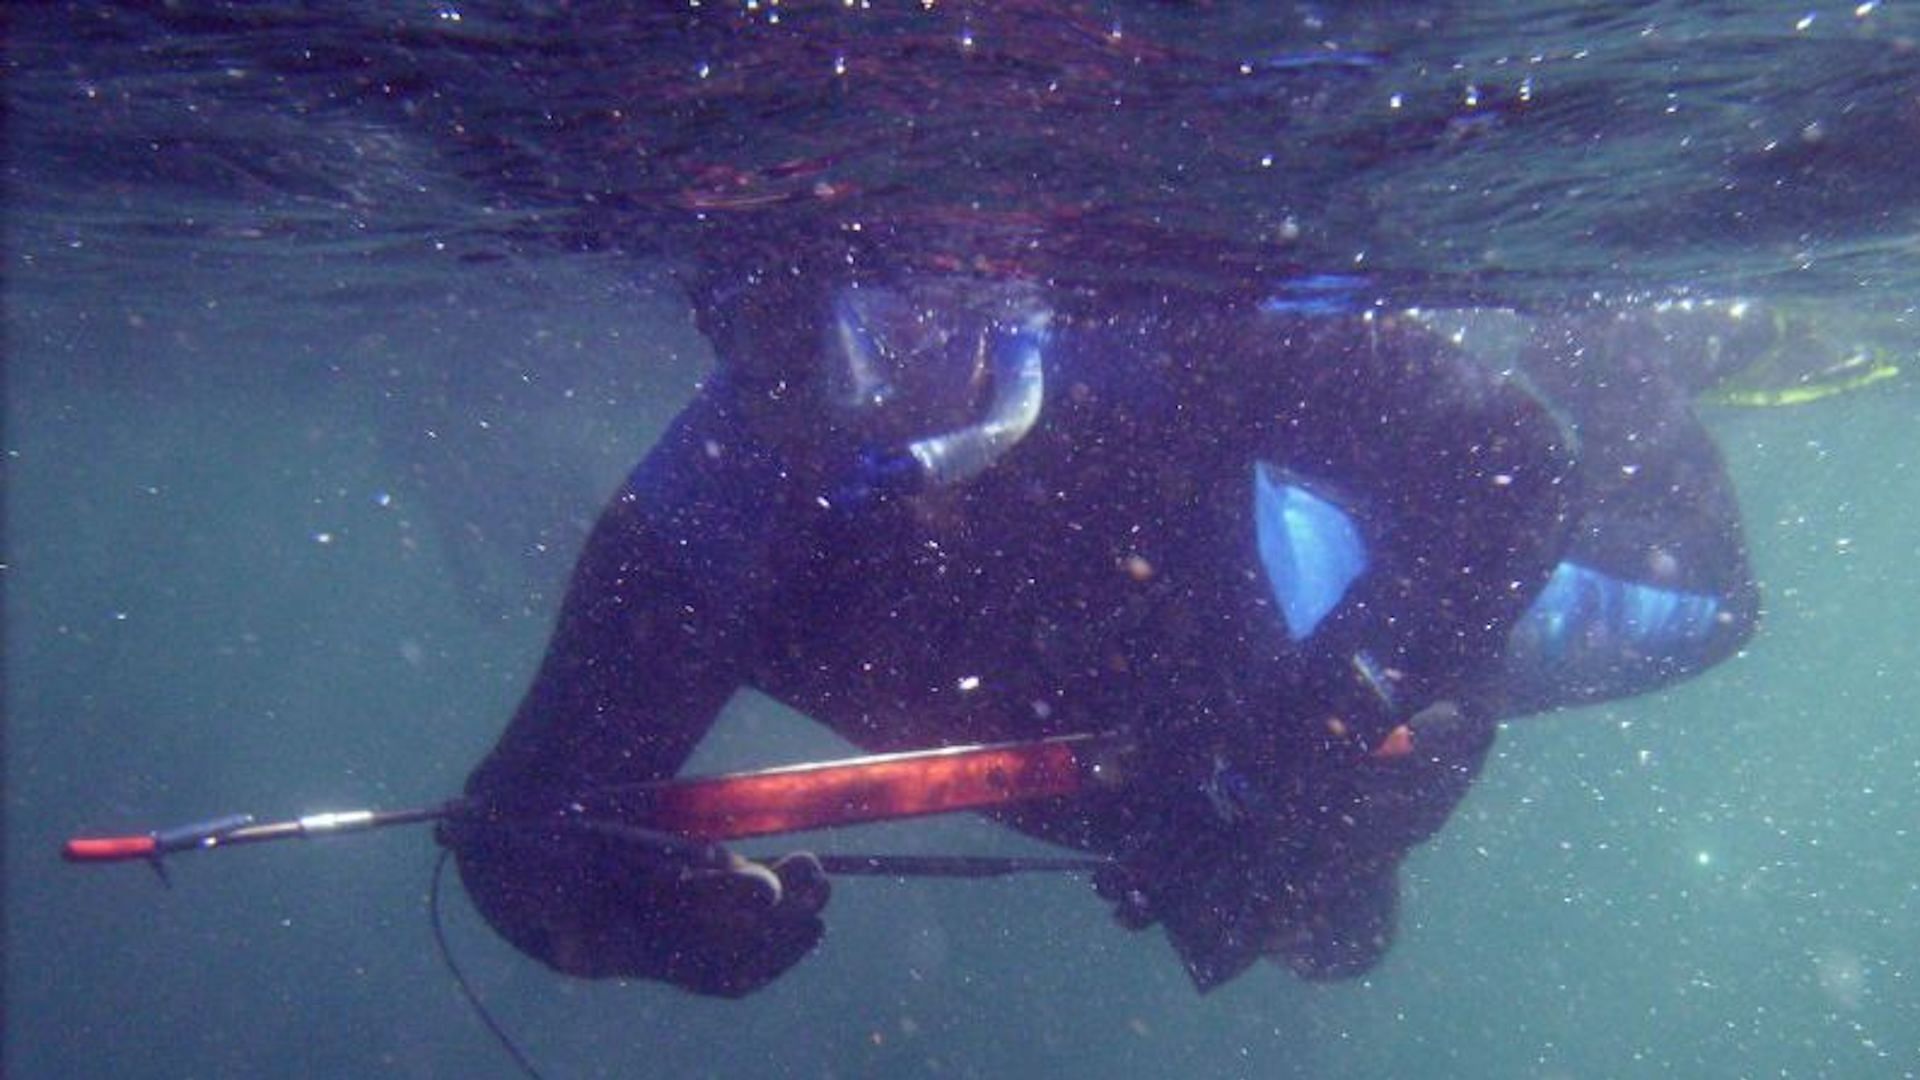 A person holding a speargun underwater (Image via Wikipedia)